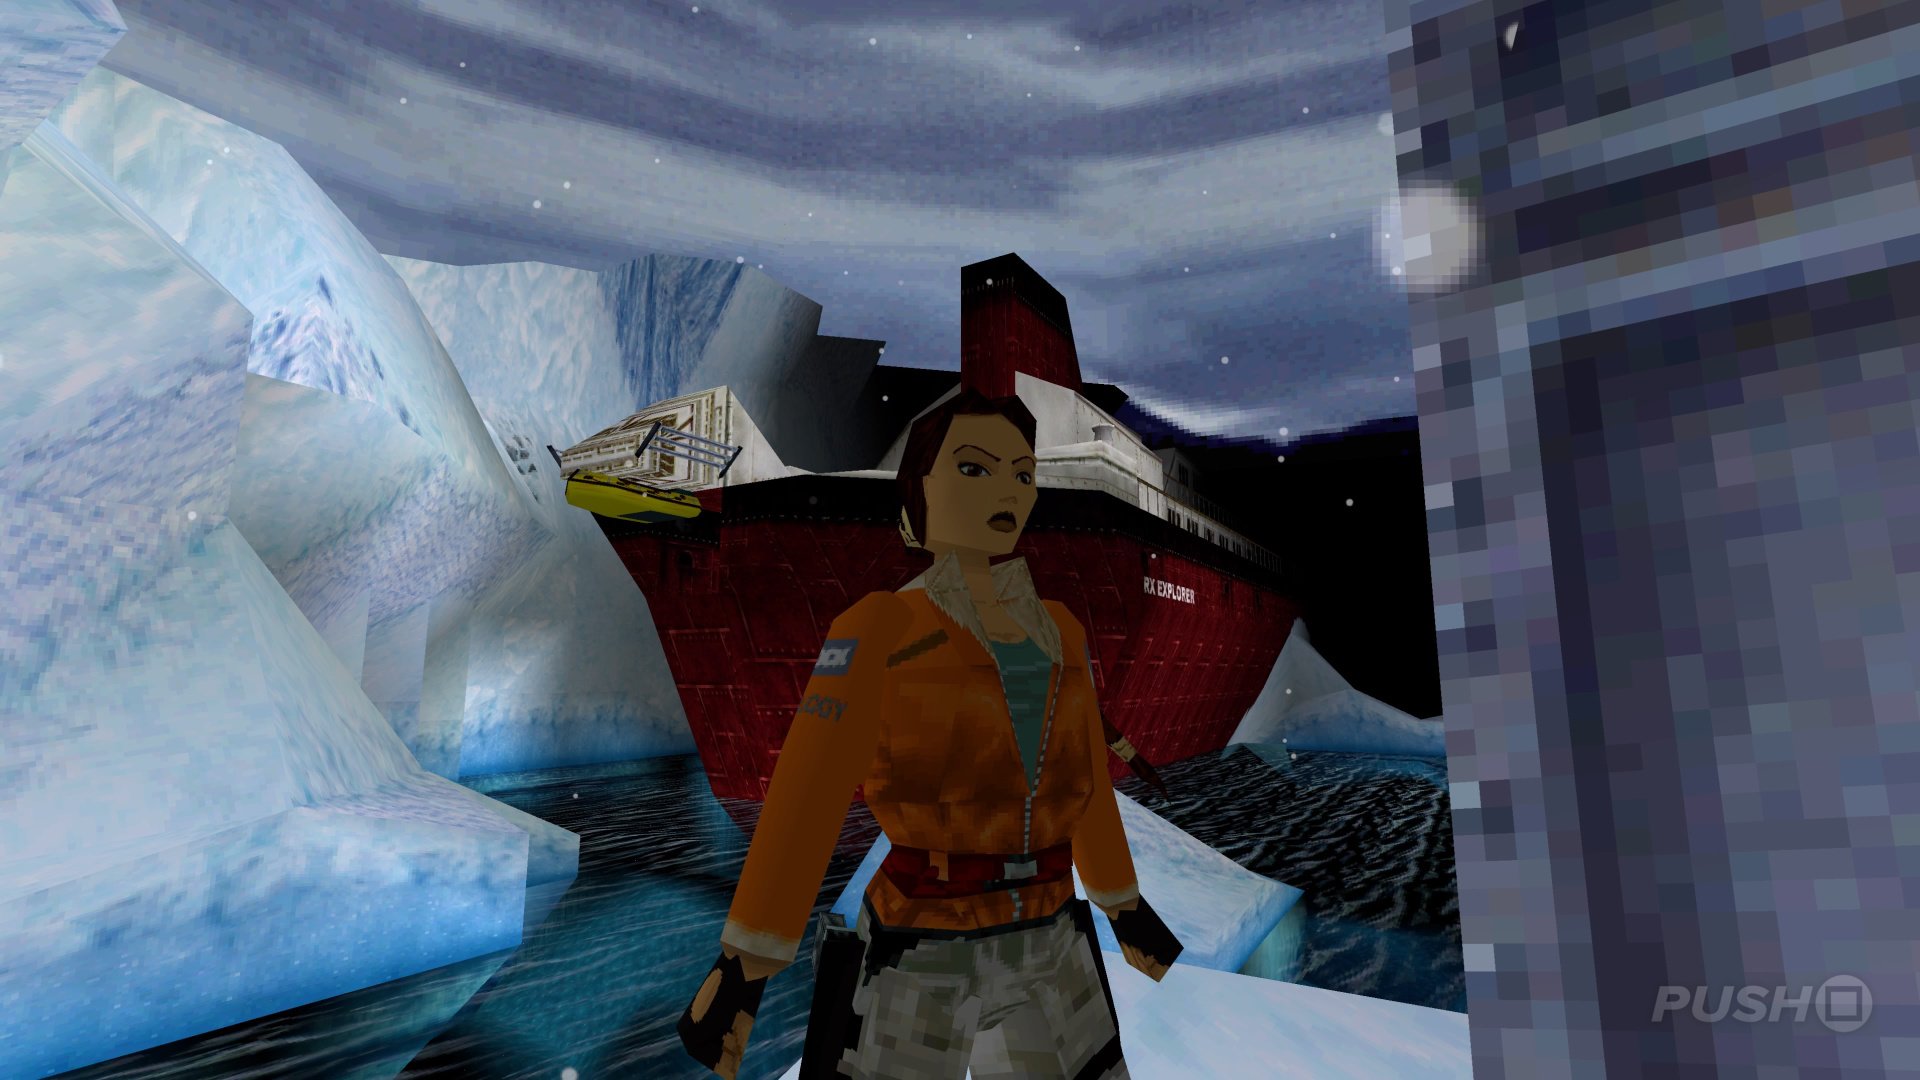 Tomb Raider I-III Remasters Give Lara Croft A Loving Makeover For